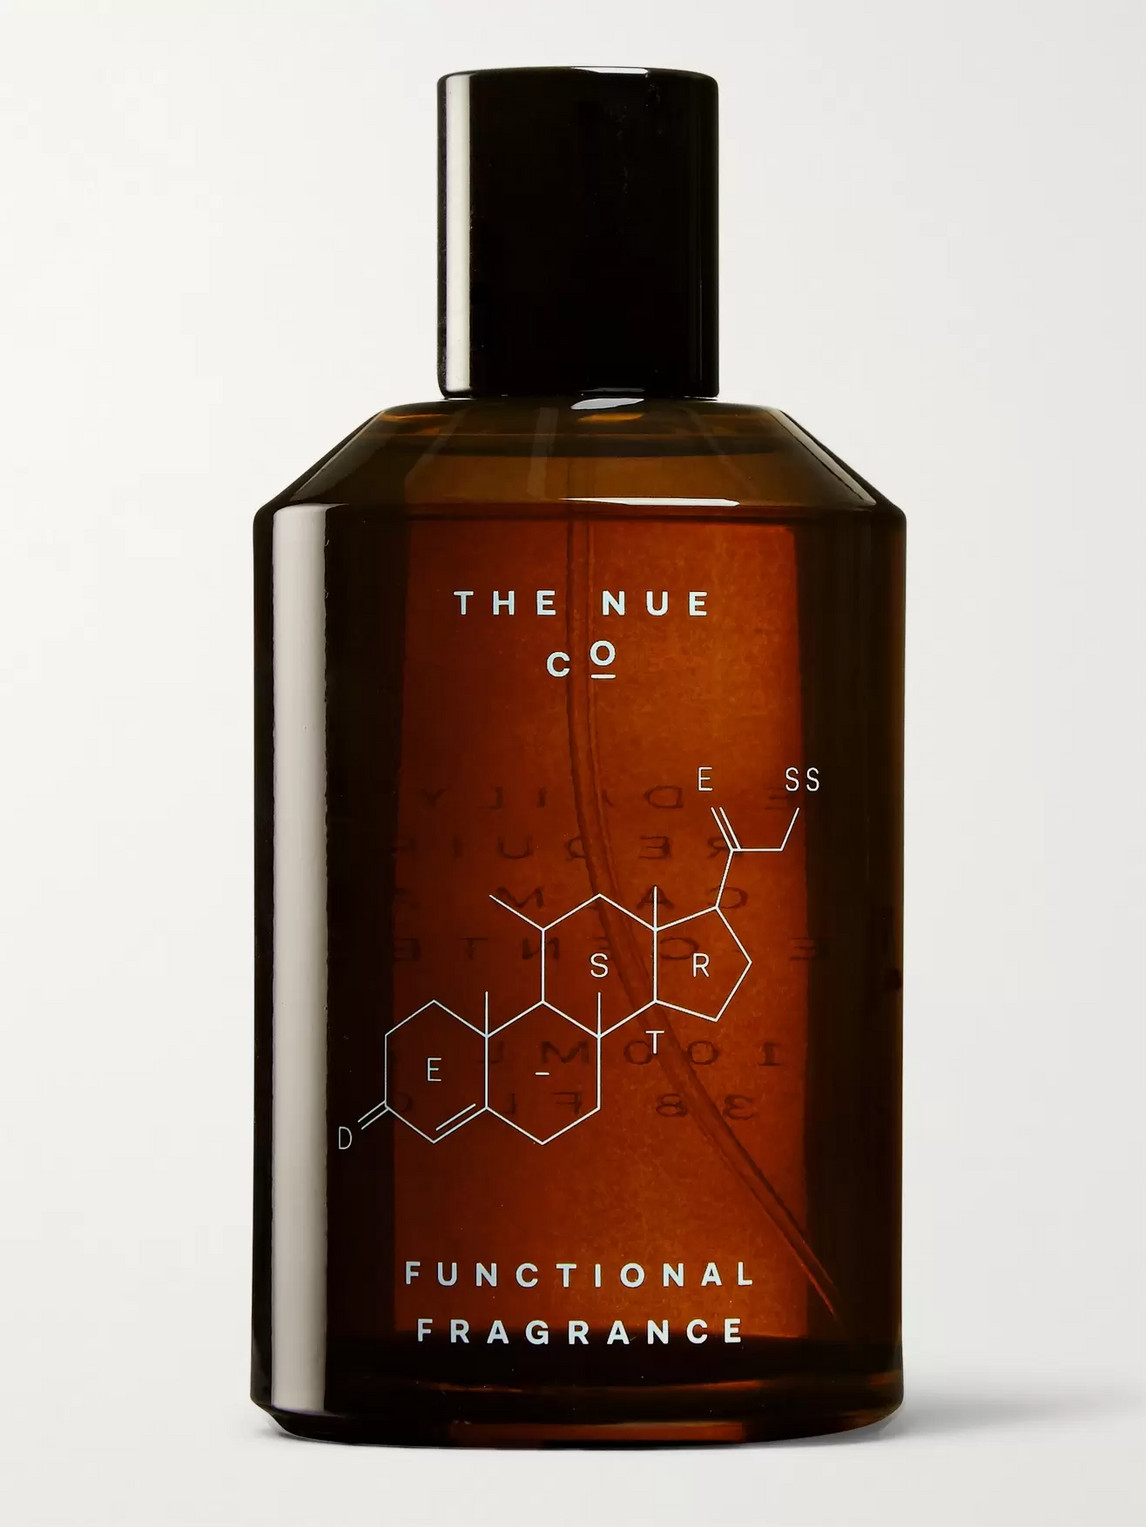 The Nue Co Functional Fragrance, 100ml In Colorless